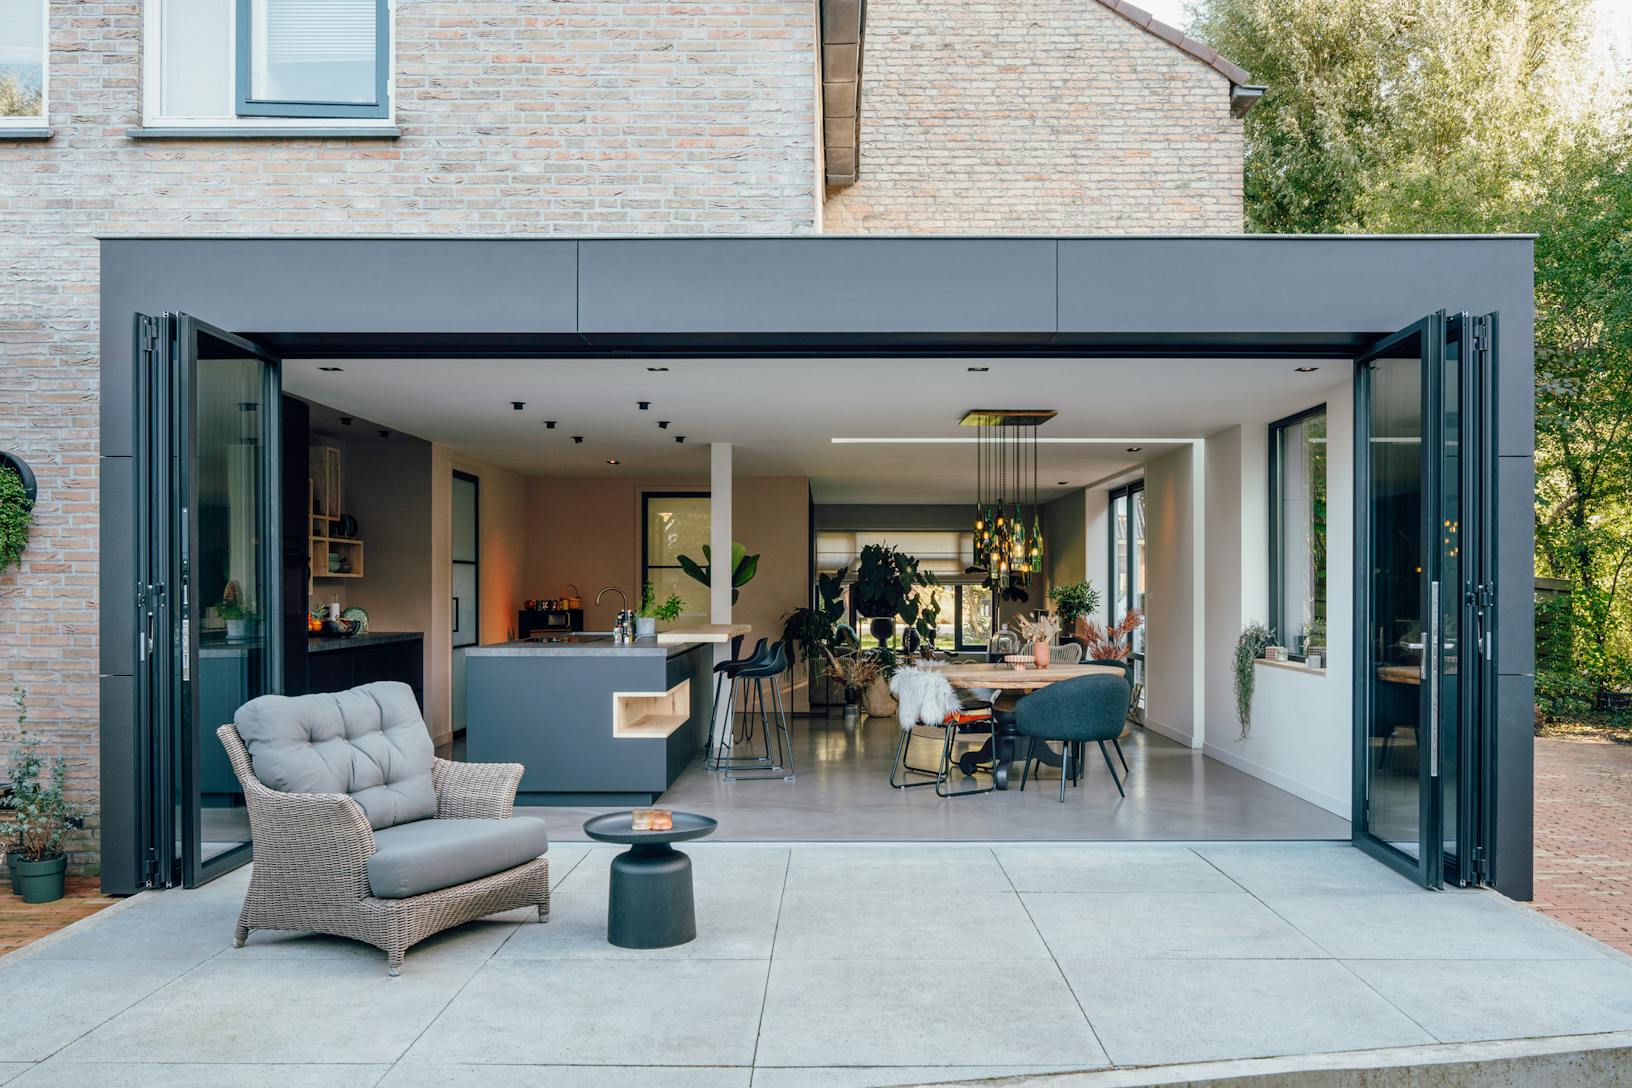 A modern patio with a black chair and table - open exterior folding glass walls